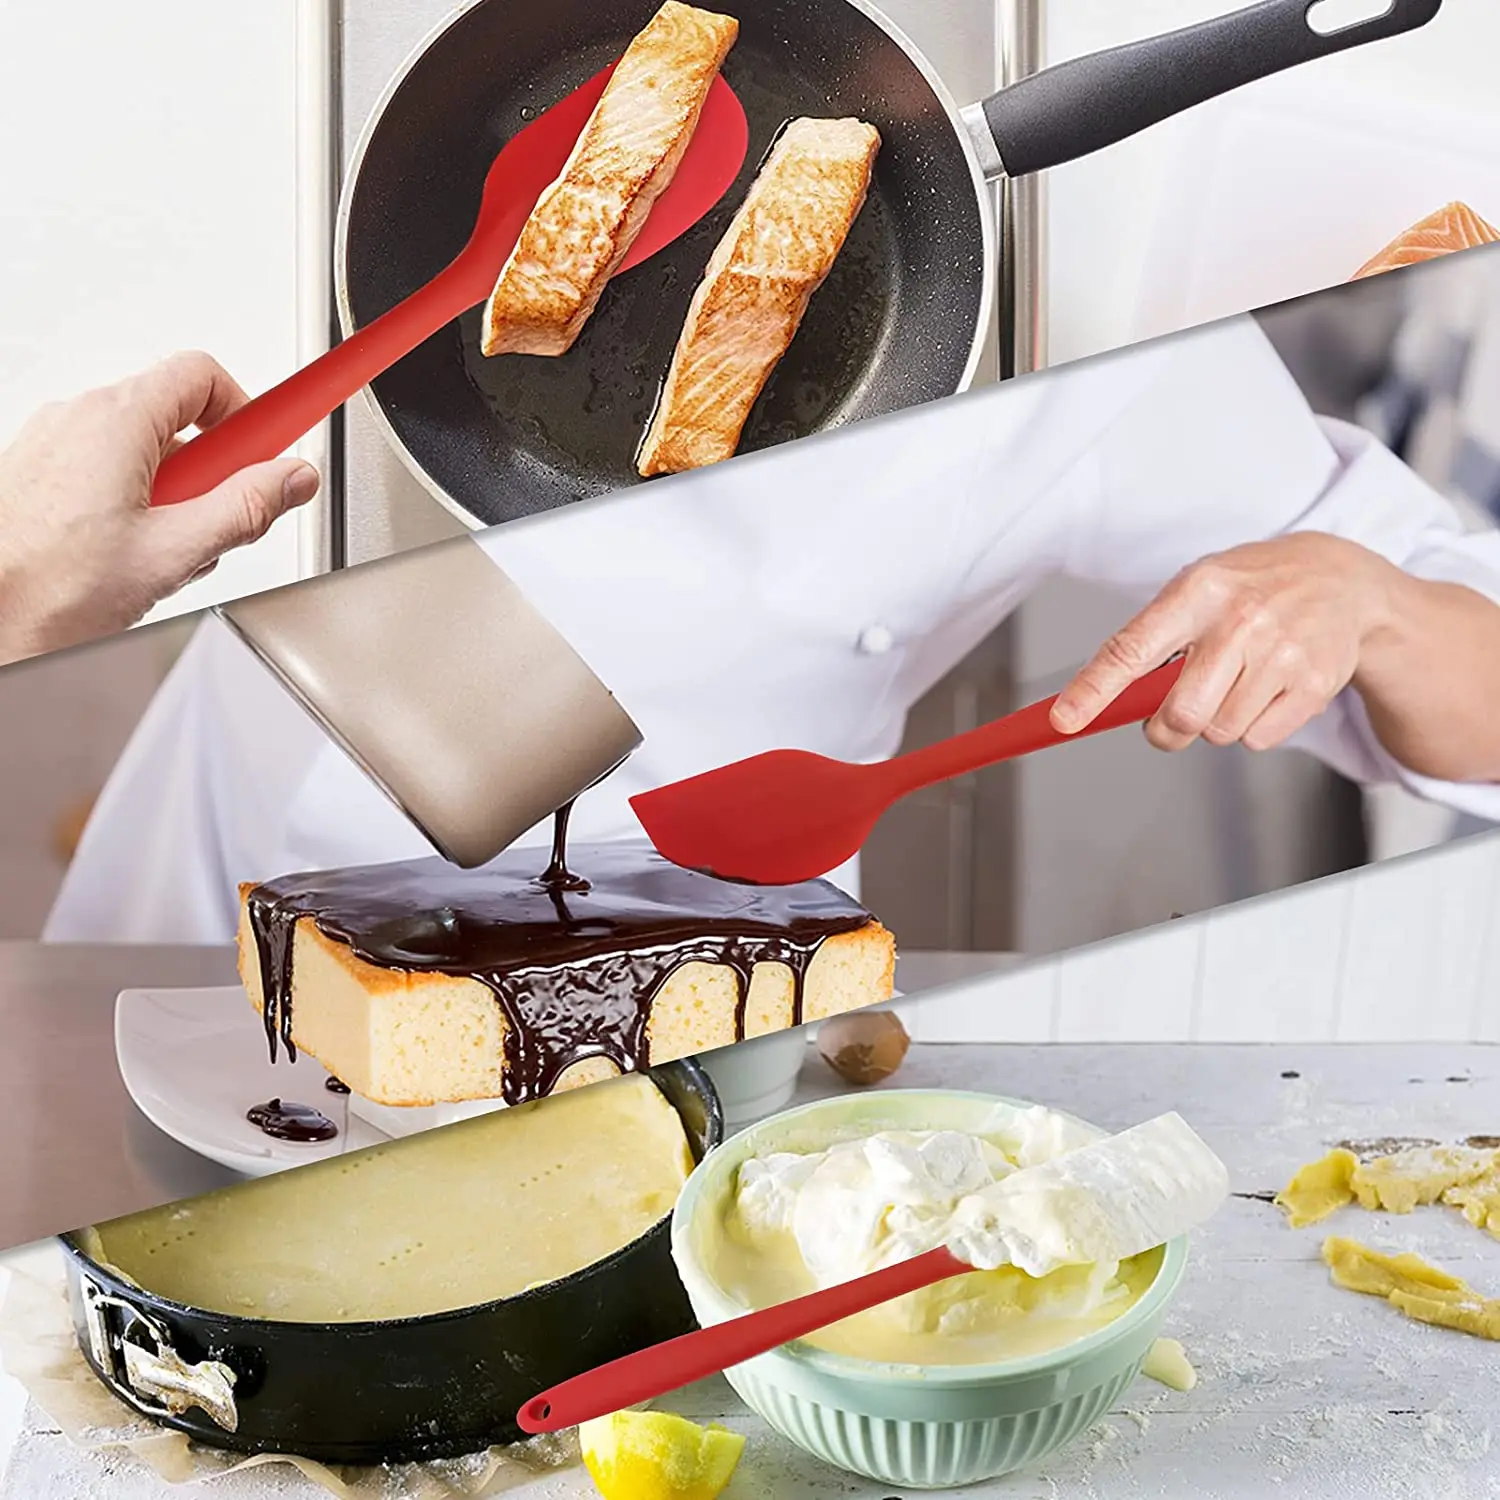 https://ae01.alicdn.com/kf/S55d874c230ce414087323f45799ddf53y/Silicone-Spatulas-Rubber-Spatula-Heat-Resistant-Scrapers-Baking-Mixing-Tool-Kitchen-Gadgets-Silicone-Cooking-Kitchen-Accessories.jpg